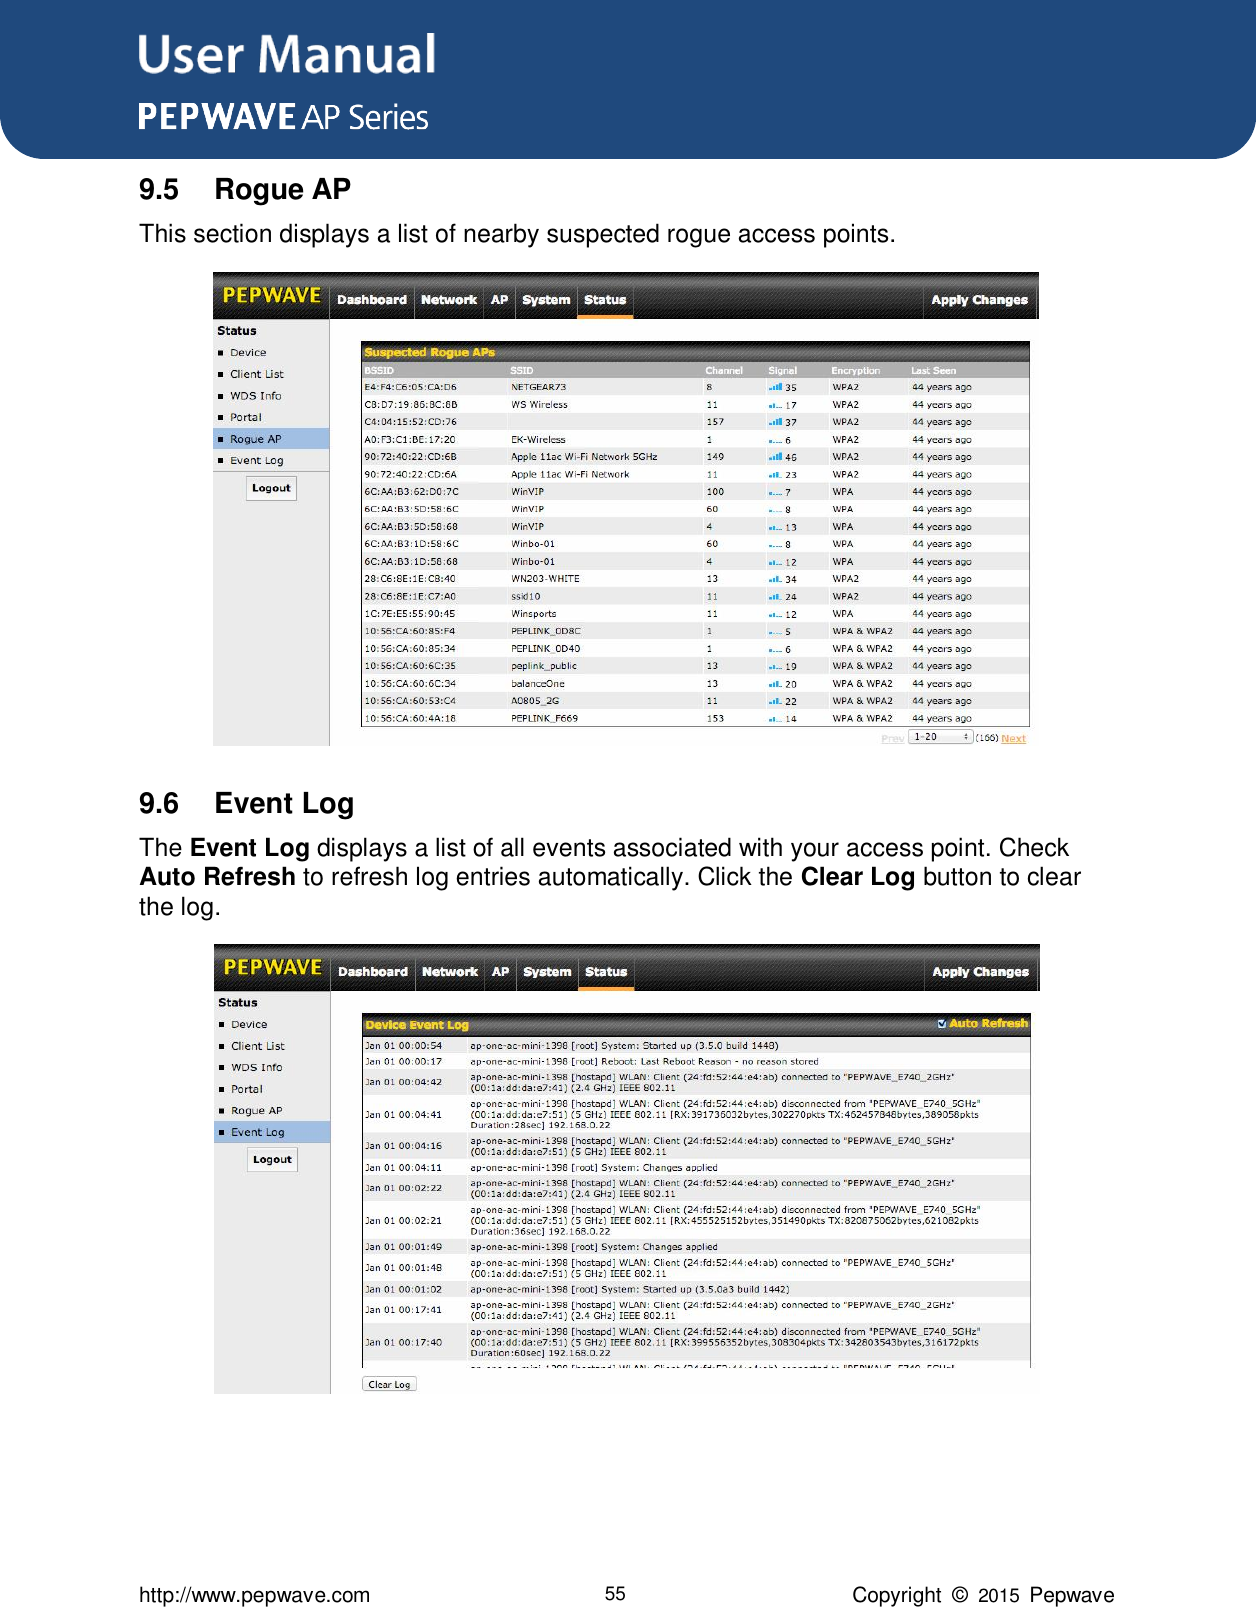 User Manual      http://www.pepwave.com 55 Copyright  ©  2015  Pepwave 9.5  Rogue AP This section displays a list of nearby suspected rogue access points.  9.6  Event Log The Event Log displays a list of all events associated with your access point. Check Auto Refresh to refresh log entries automatically. Click the Clear Log button to clear the log.      